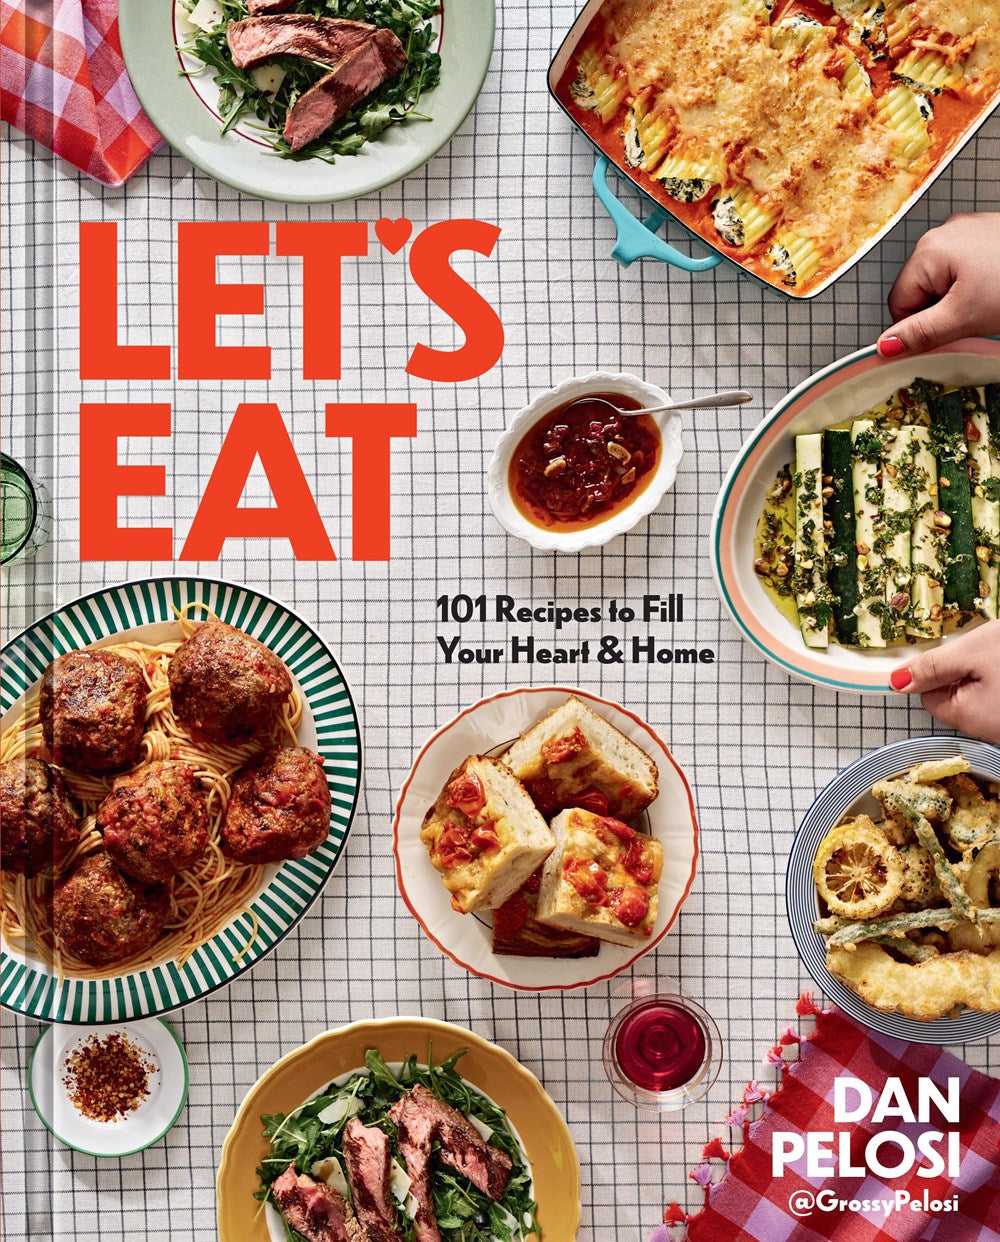 Let's Eat: 101 Recipes to Fill Your Heart & Home by Dan Pelosi (9/5/23)